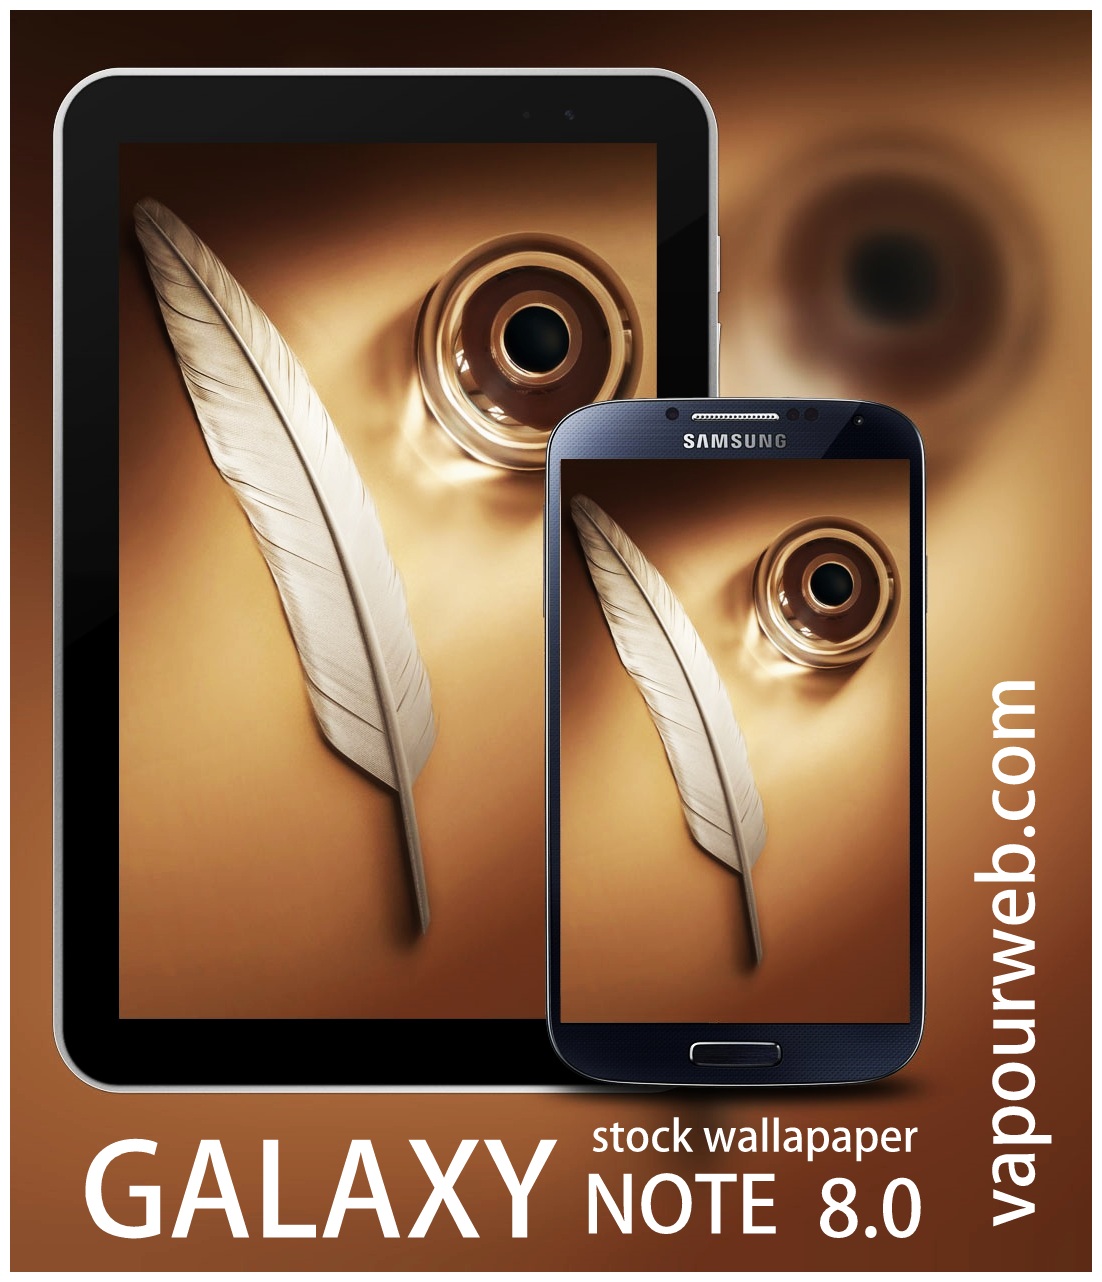 Galaxy Note 8.0 all stock wallpapers | VapourWeb.com